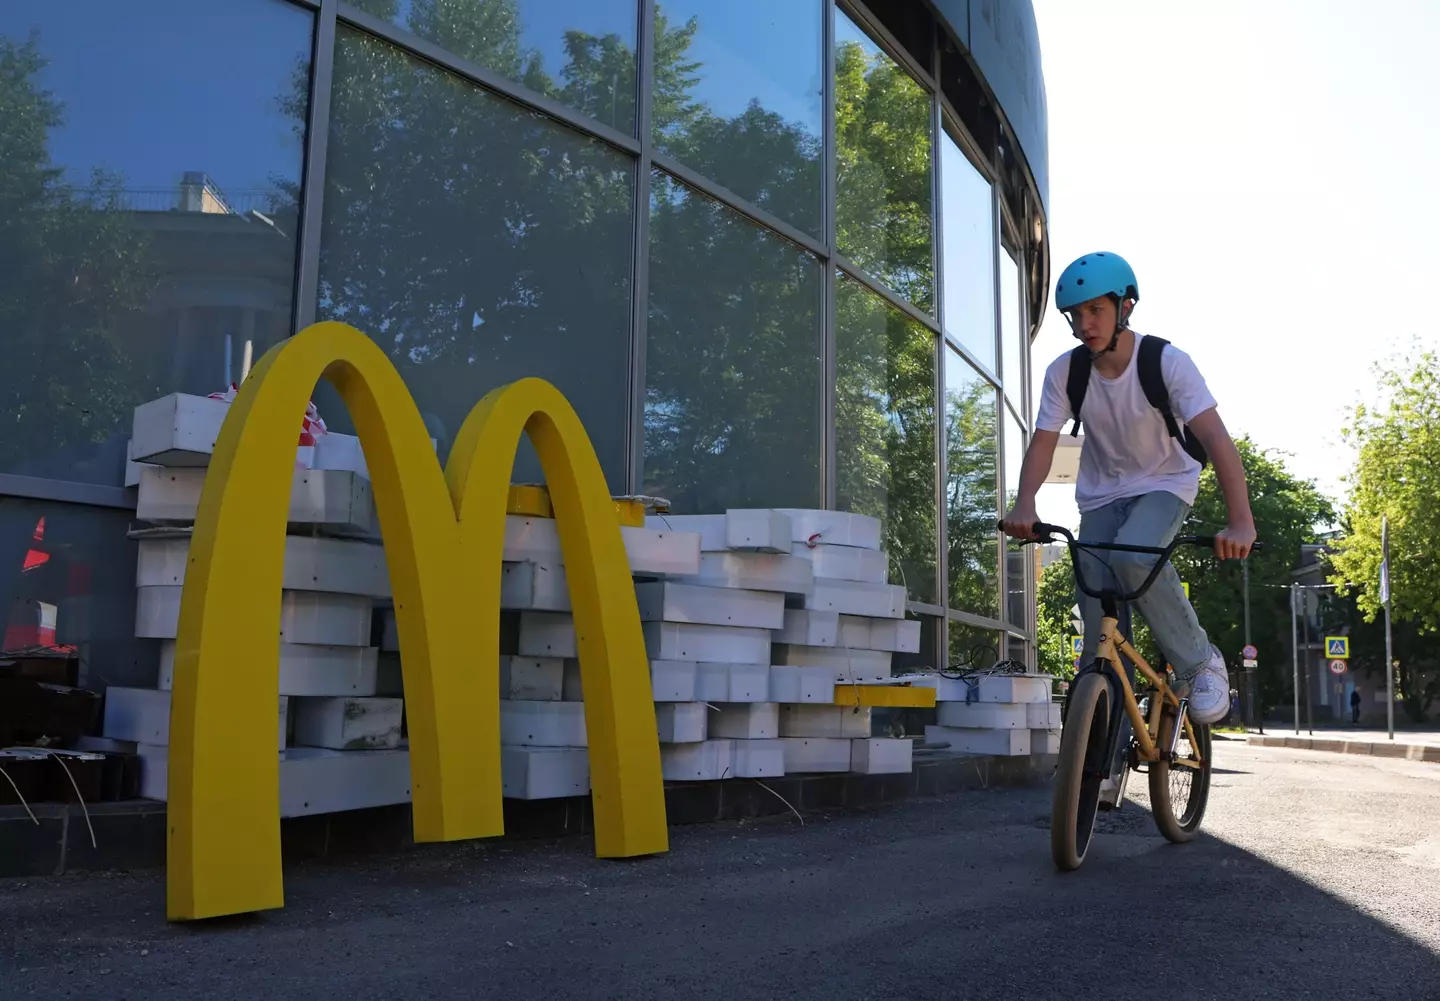 A child cycles past a closed down McDonald's in St Petersburg.